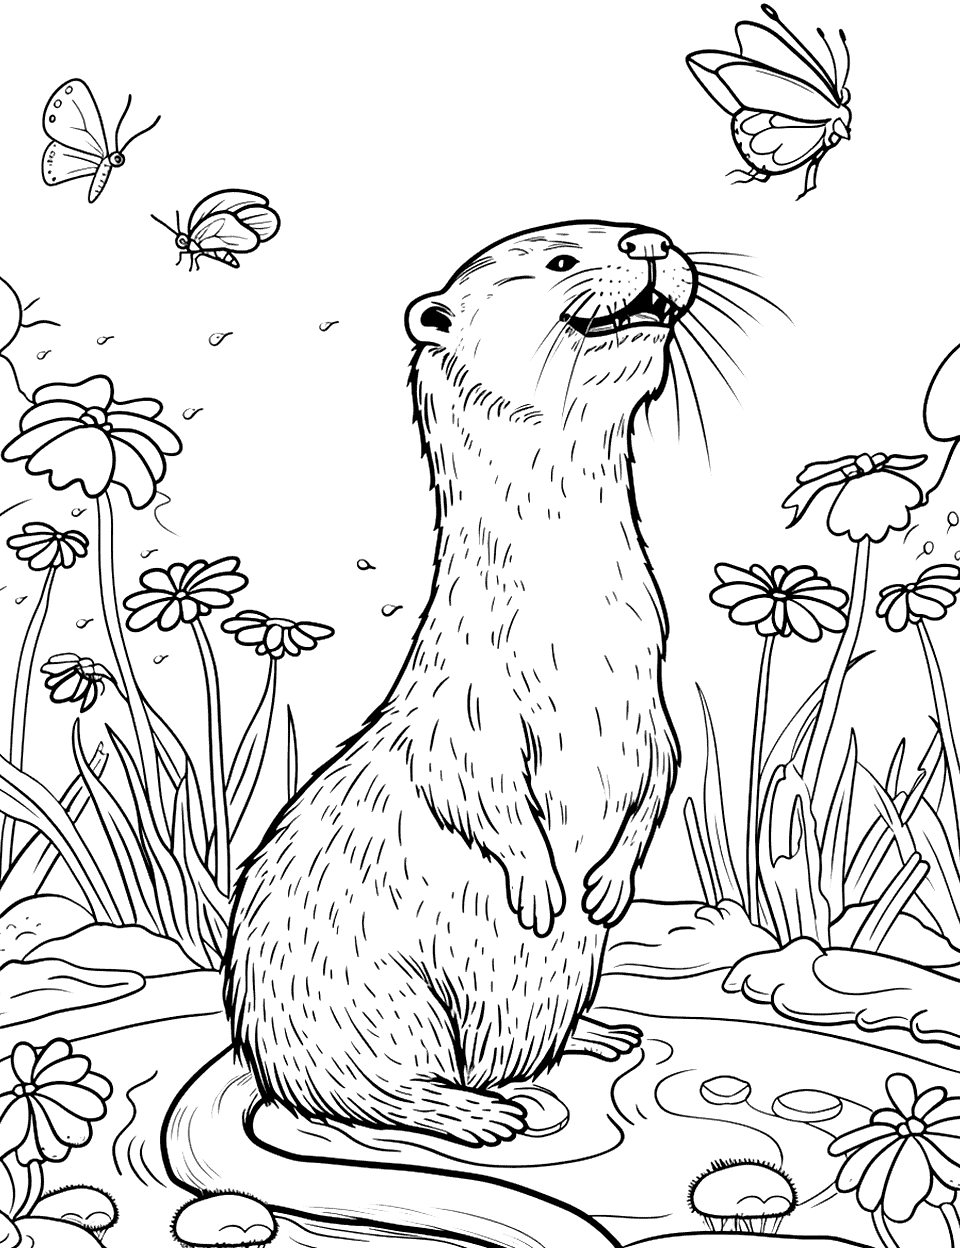 Otter Chasing Butterflies Coloring Page - An otter in a meadow, standing and looking curiously at a fluttering butterflies.